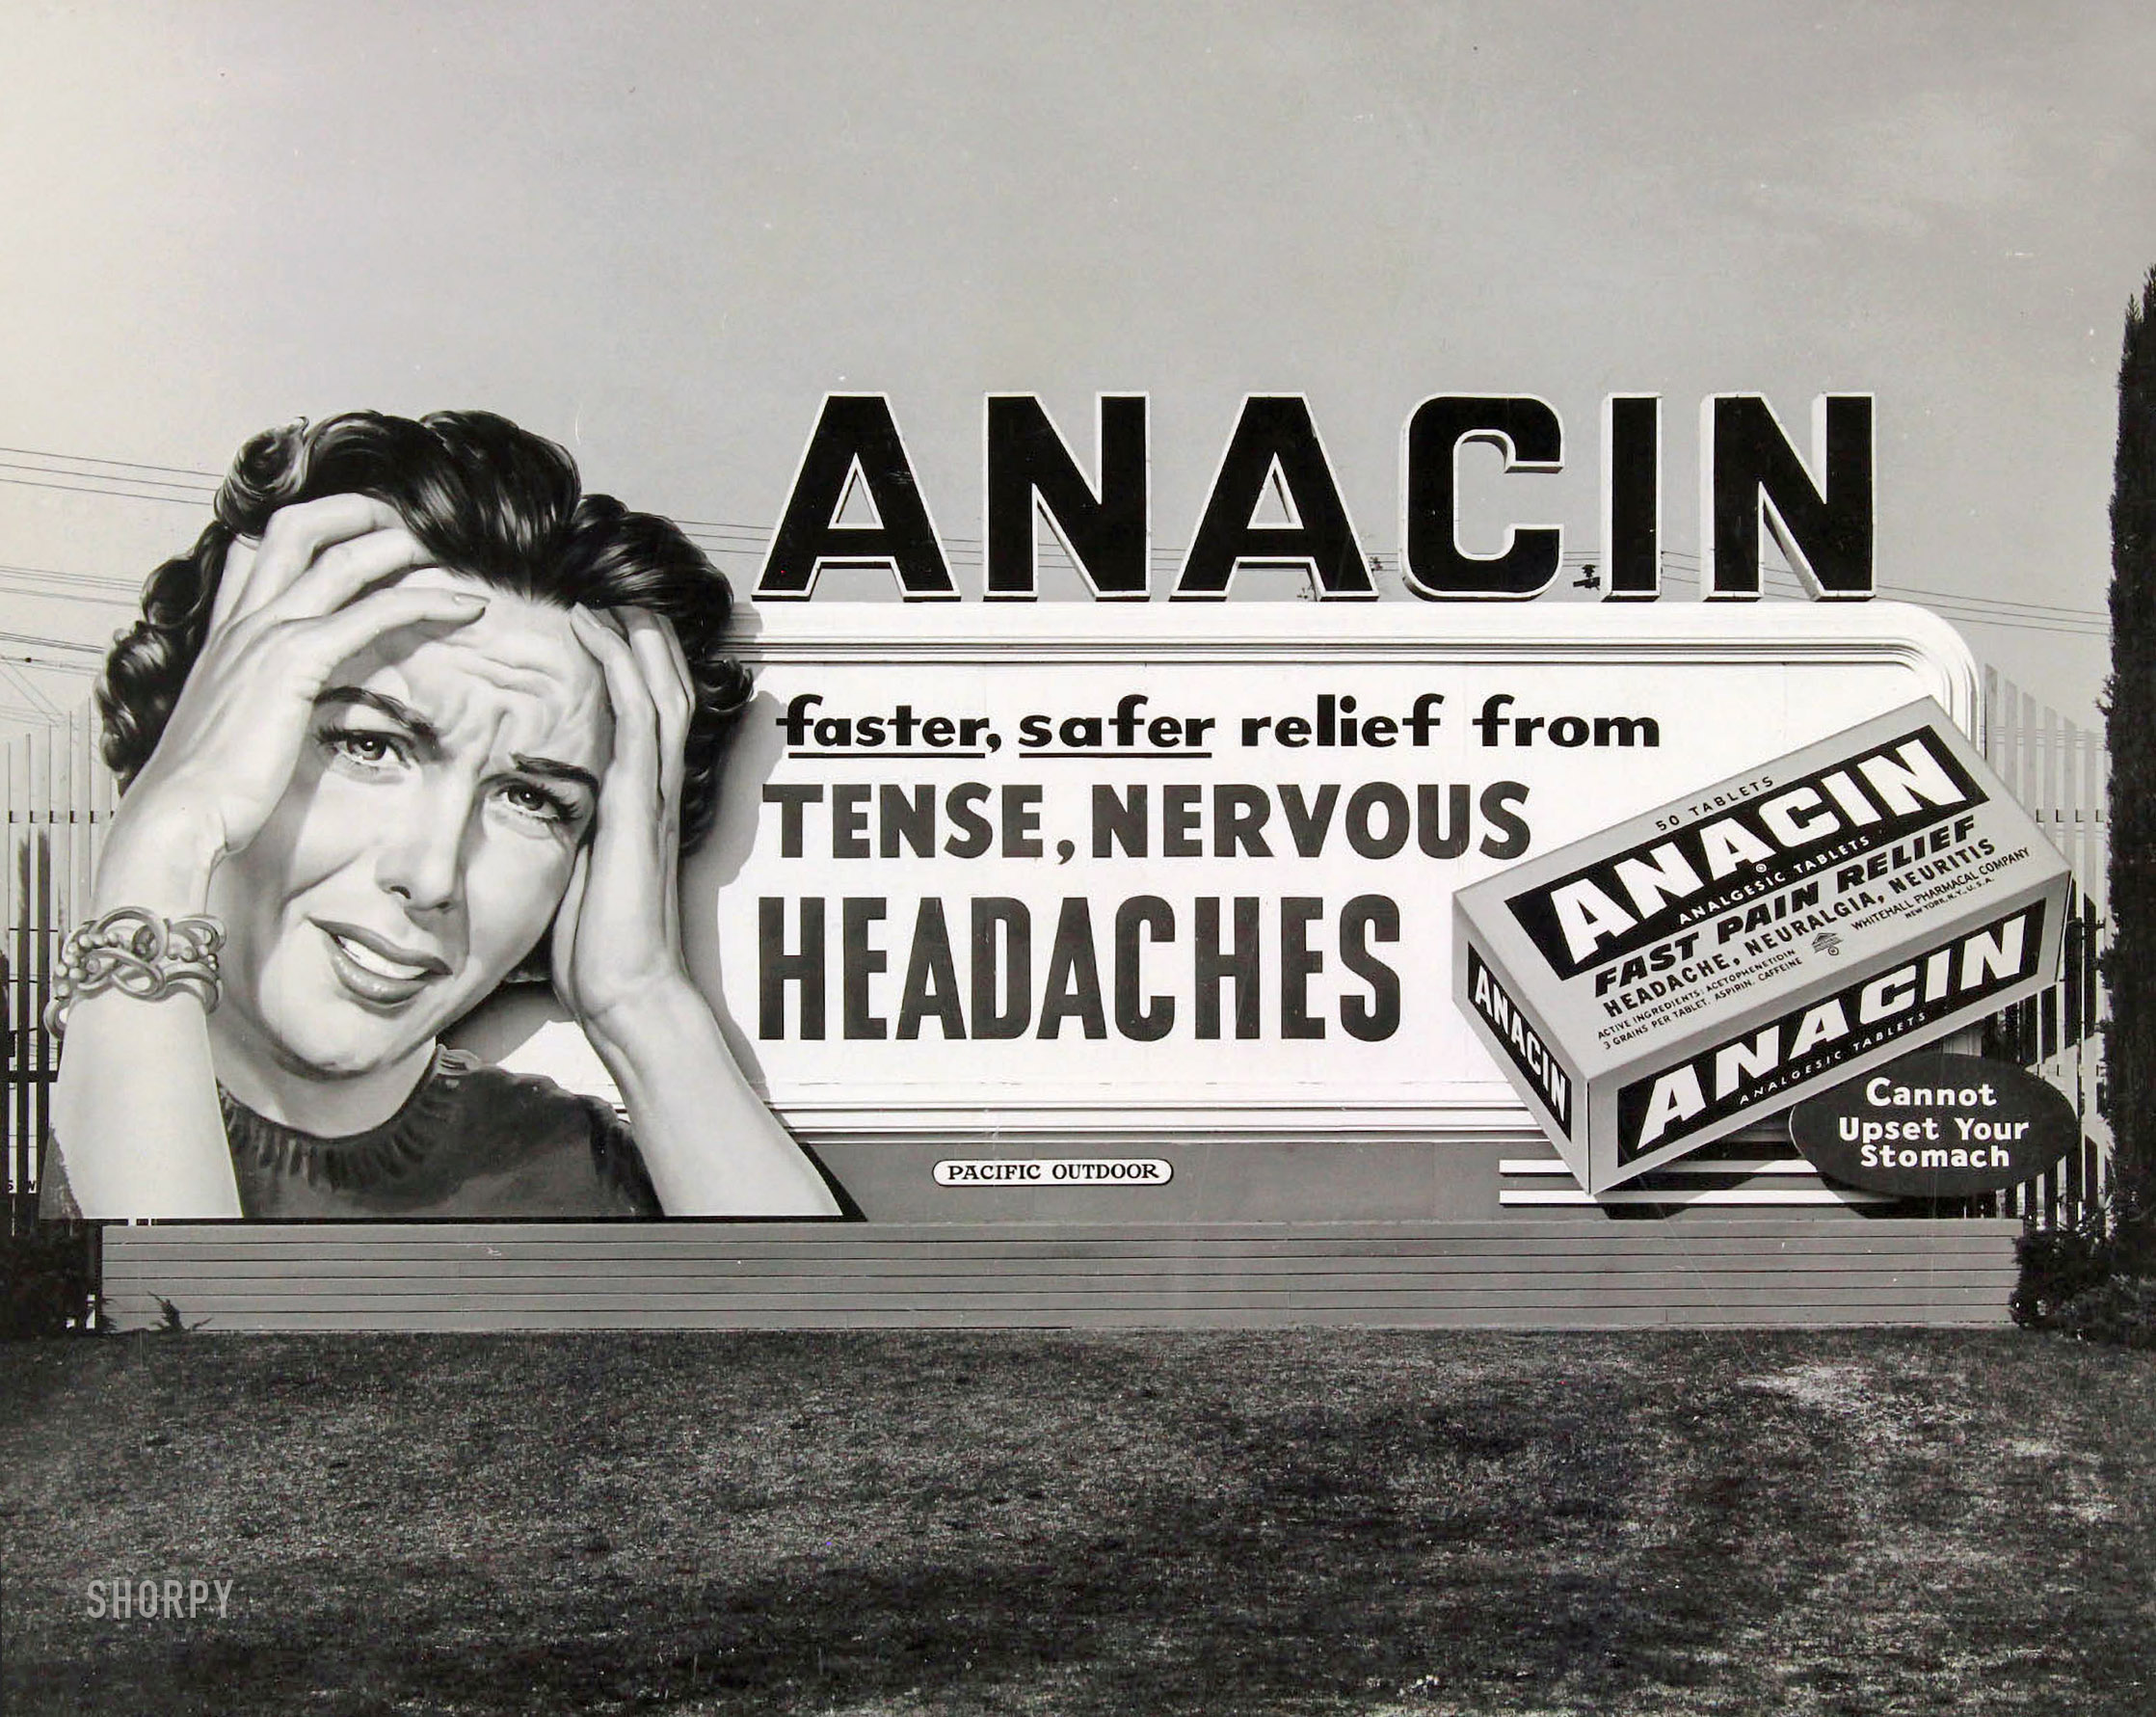 Los Angeles circa 1954-57. "Anacin: Faster, safer relief from tense, nervous headaches." Our first in series of billboard photos from the files of Pacific Outdoor Advertising. View full size.